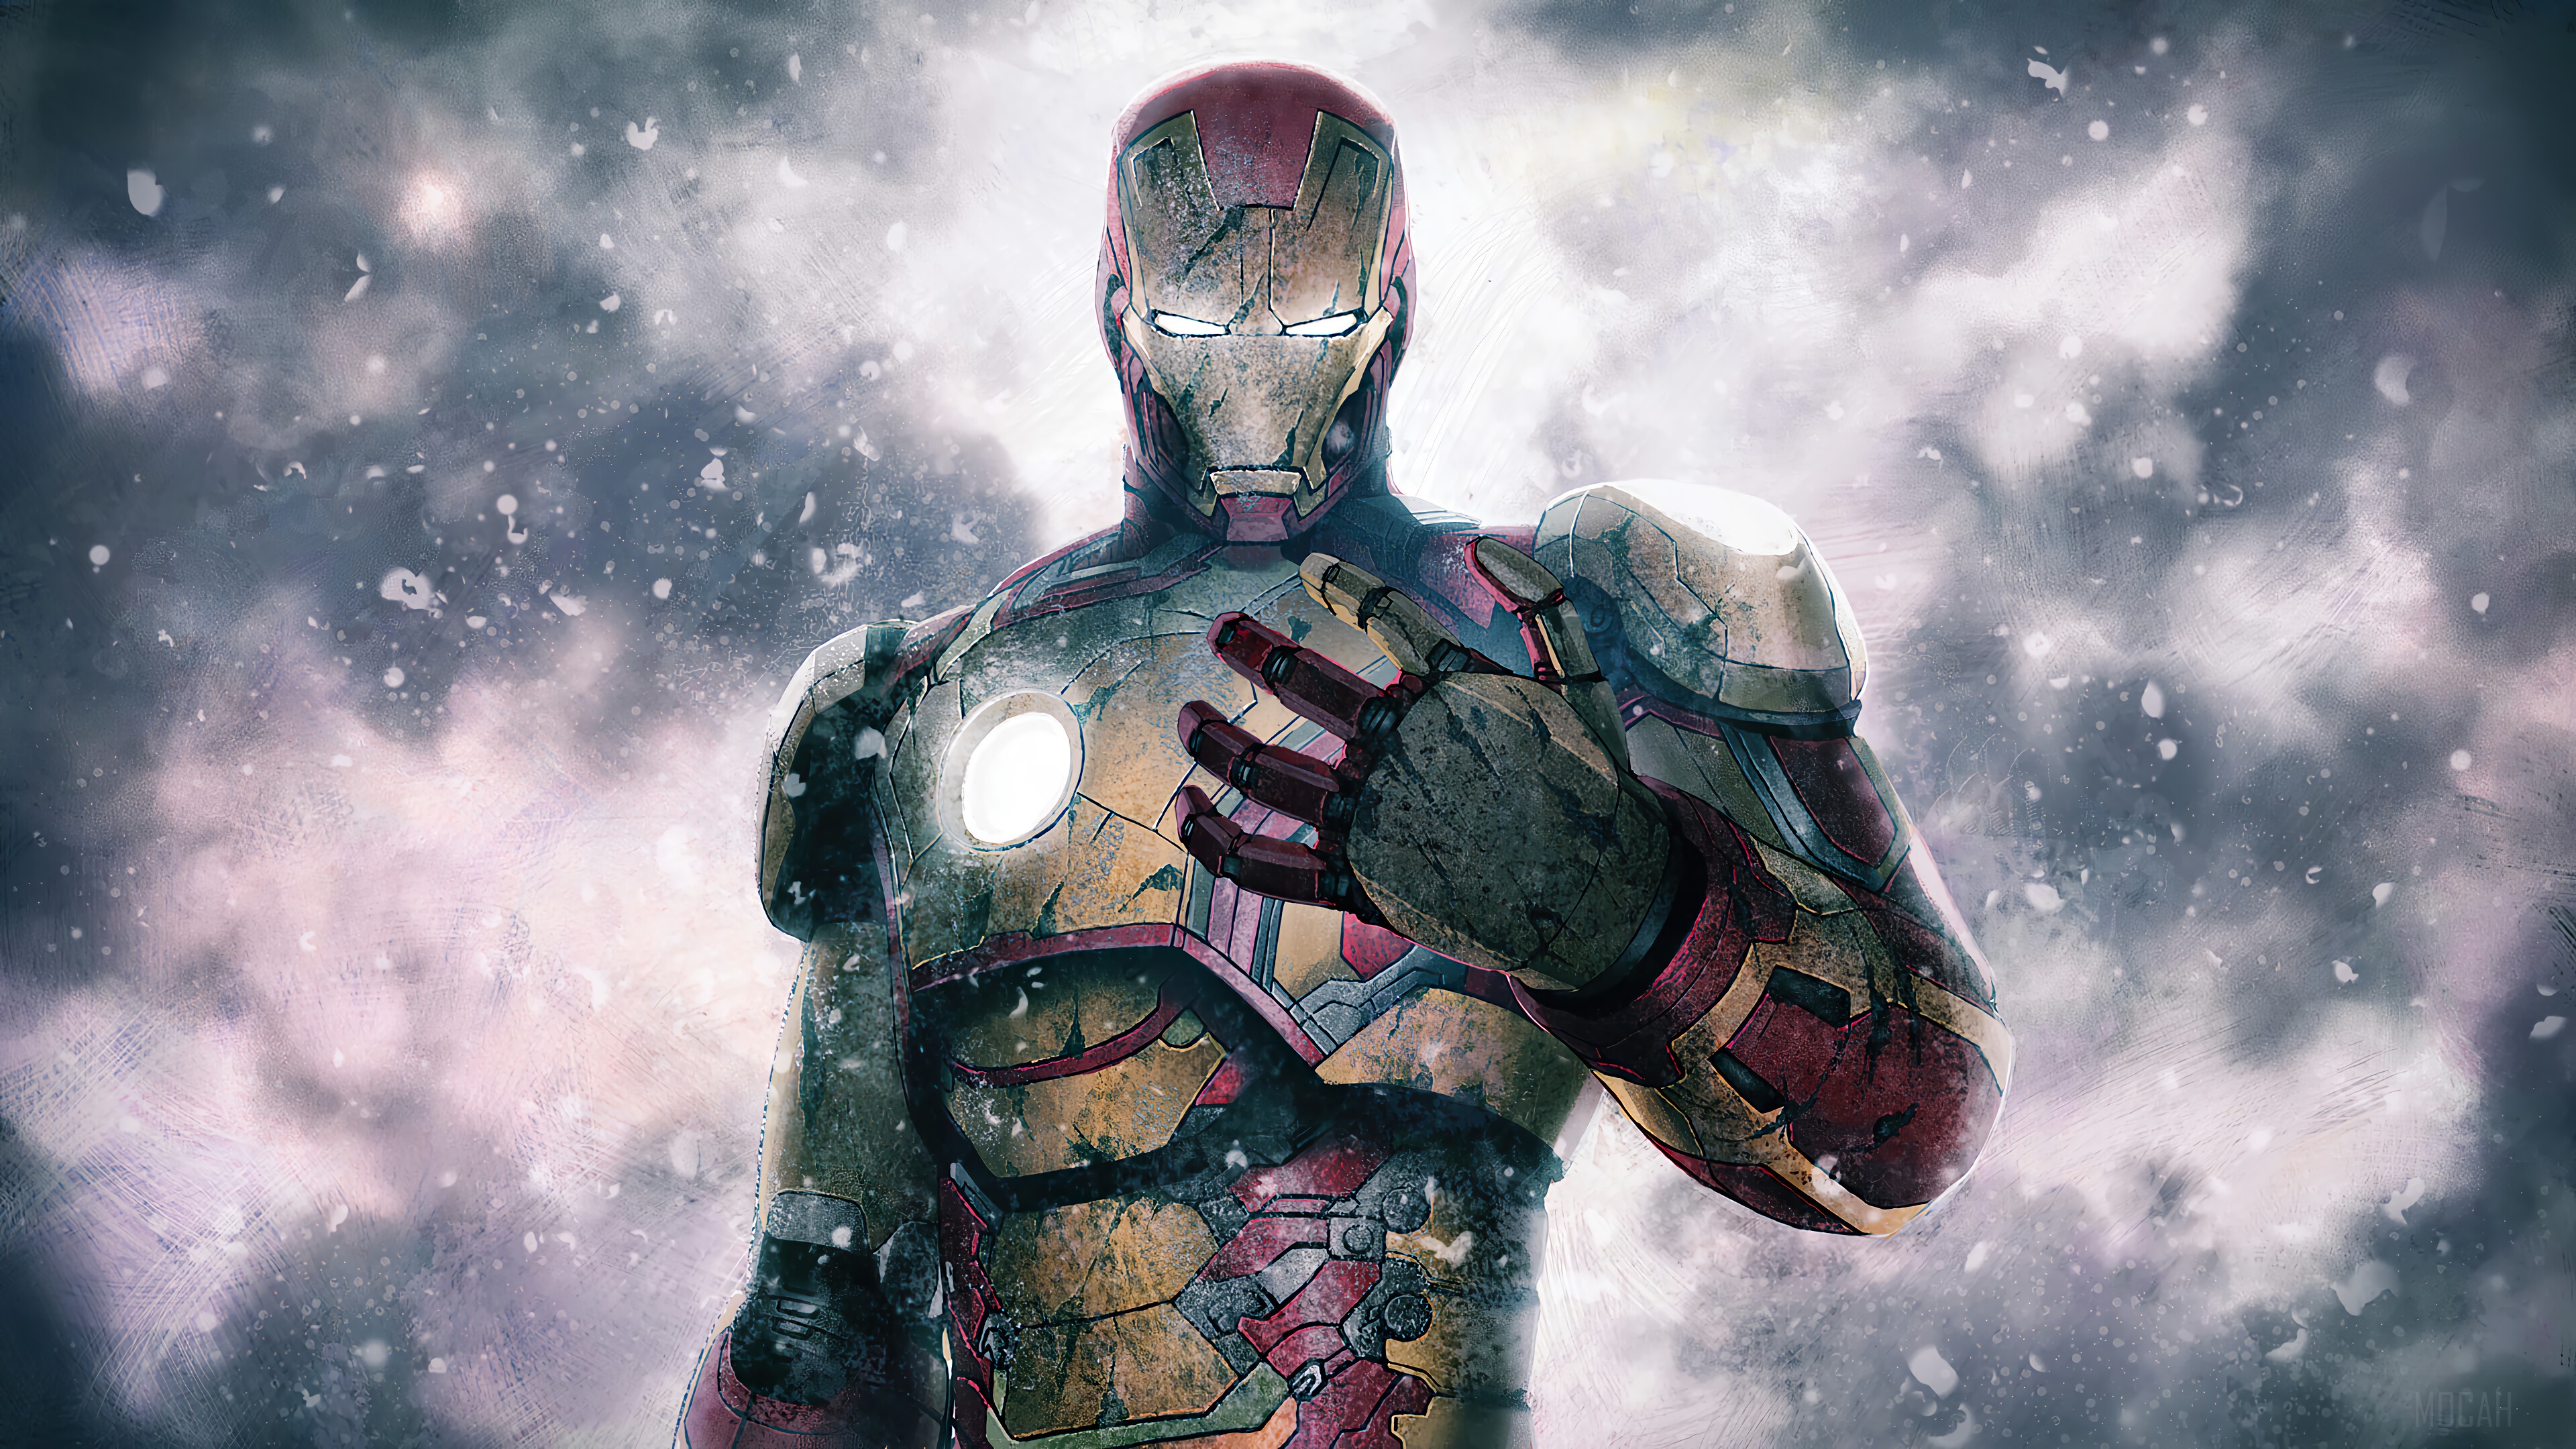 Iron man p k k hd wallpapers backgrounds free download rare gallery